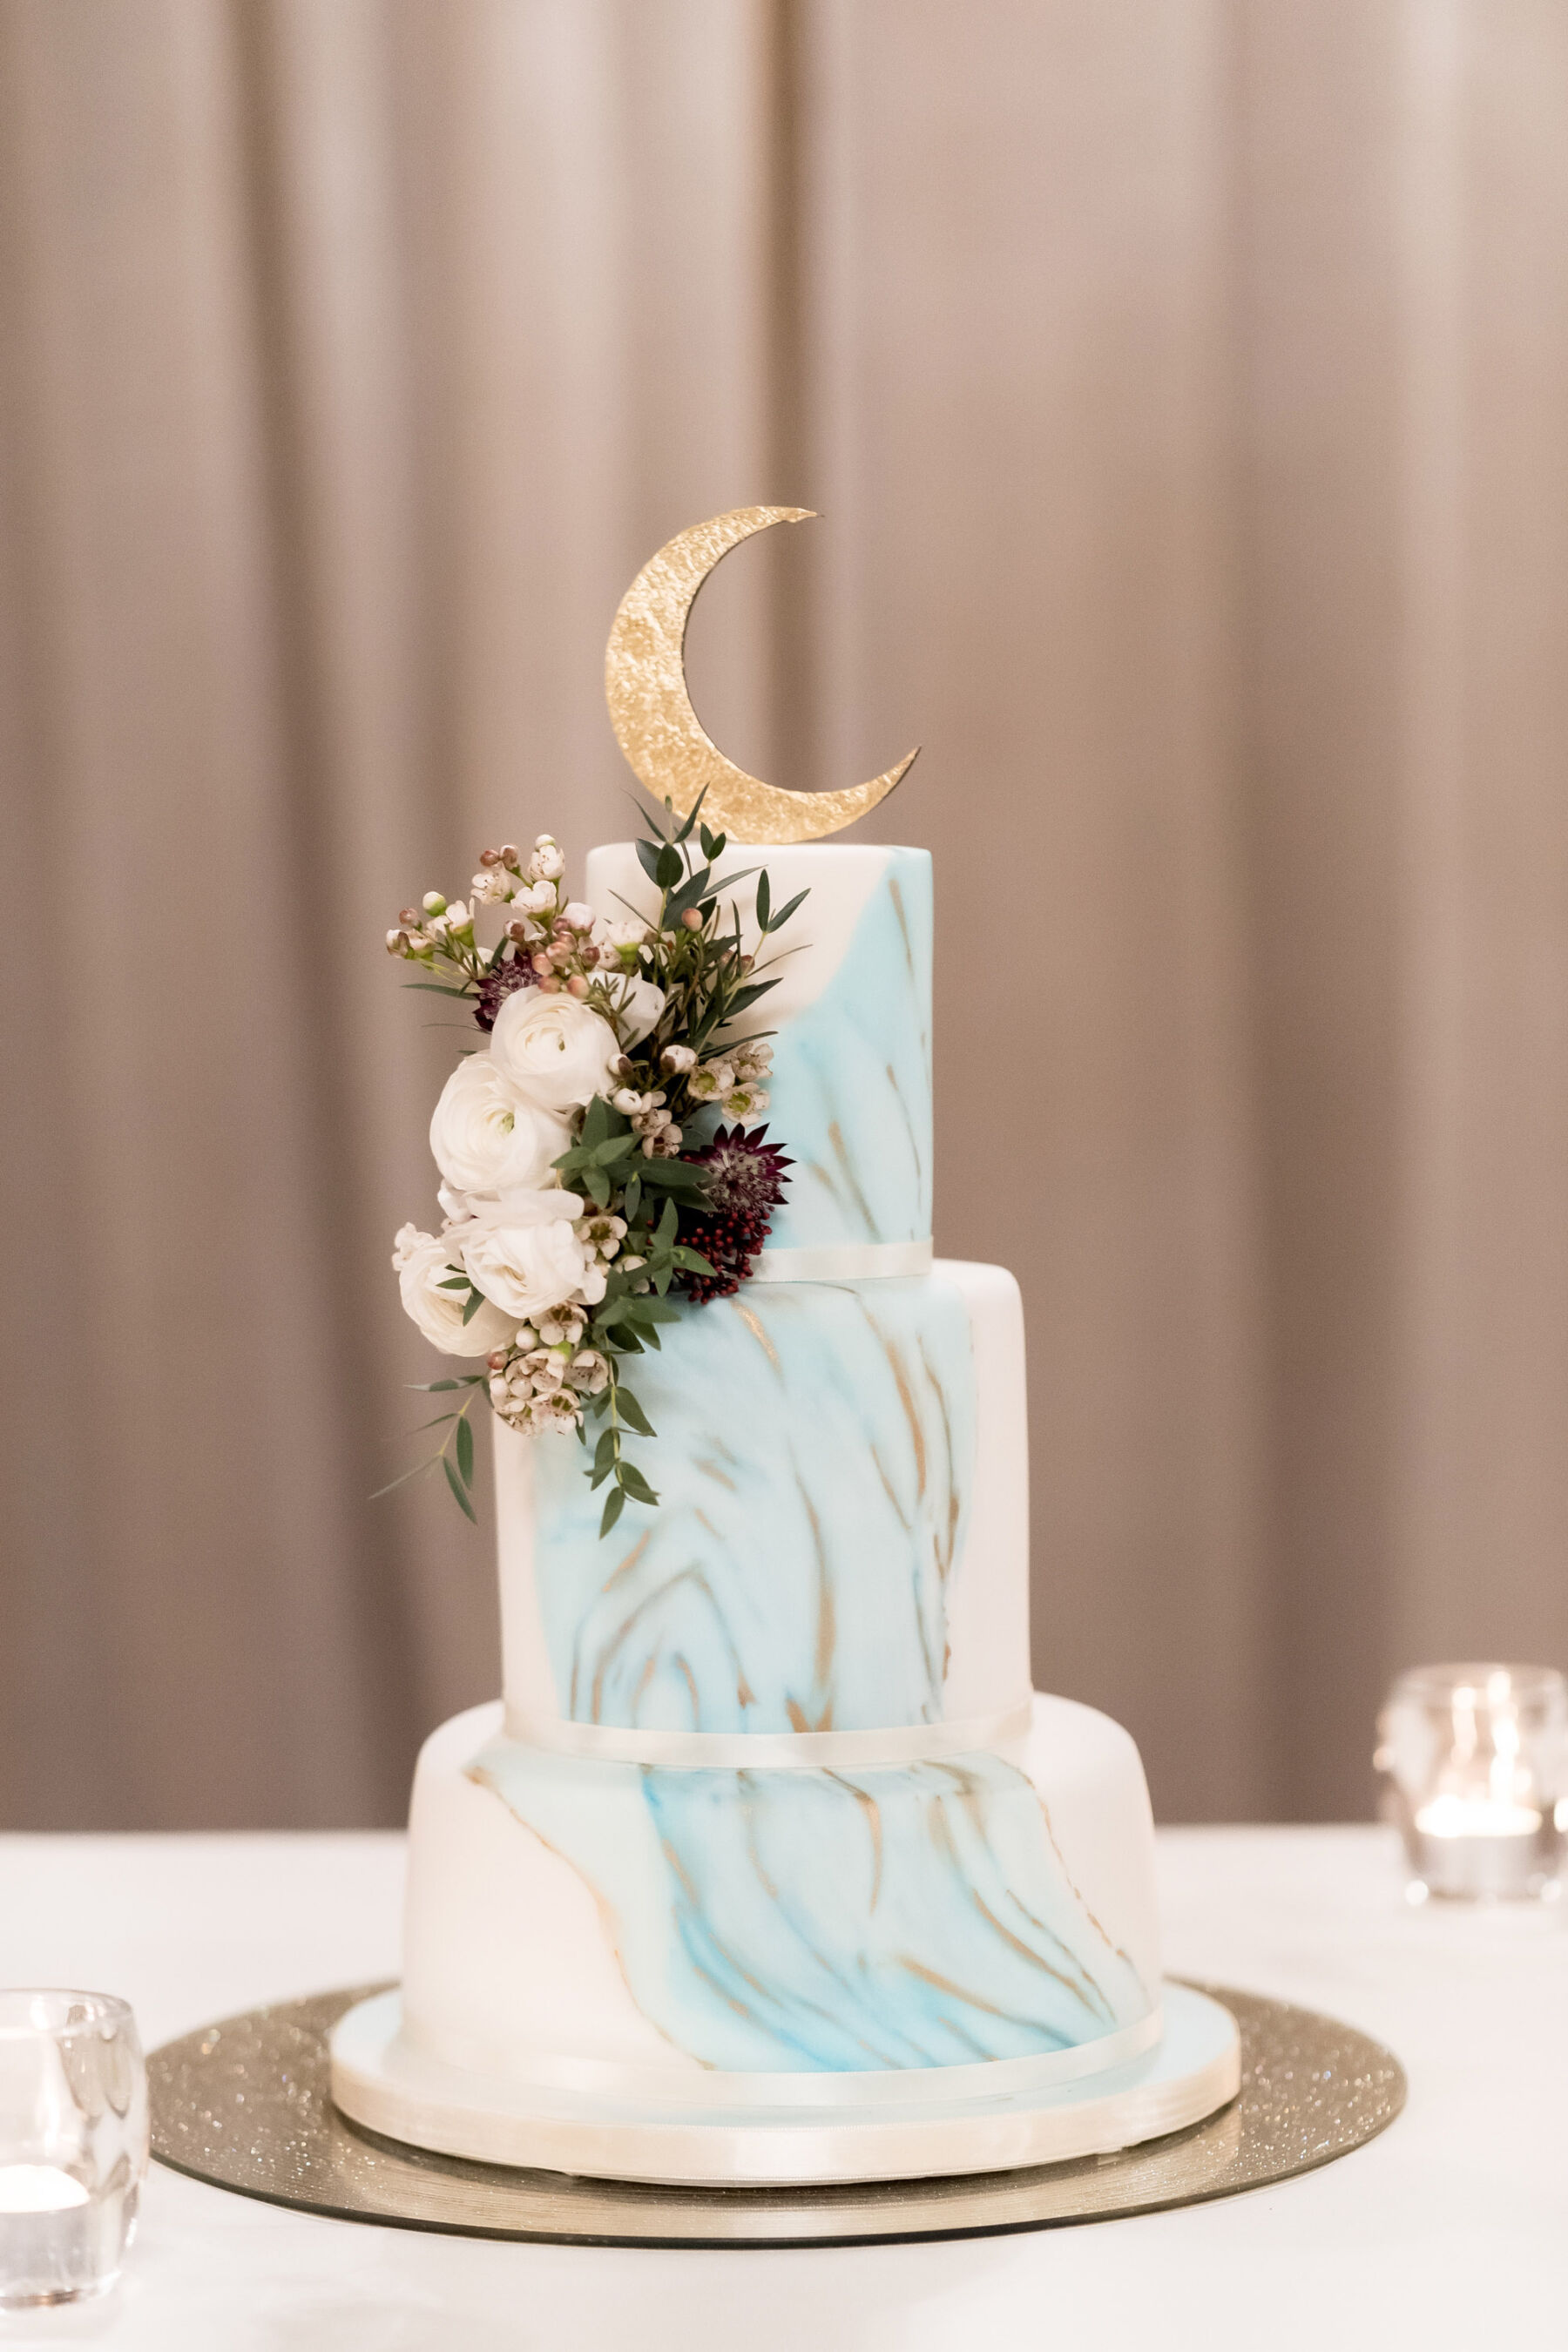 Celestial wedding cake with crescent moon cake topper.